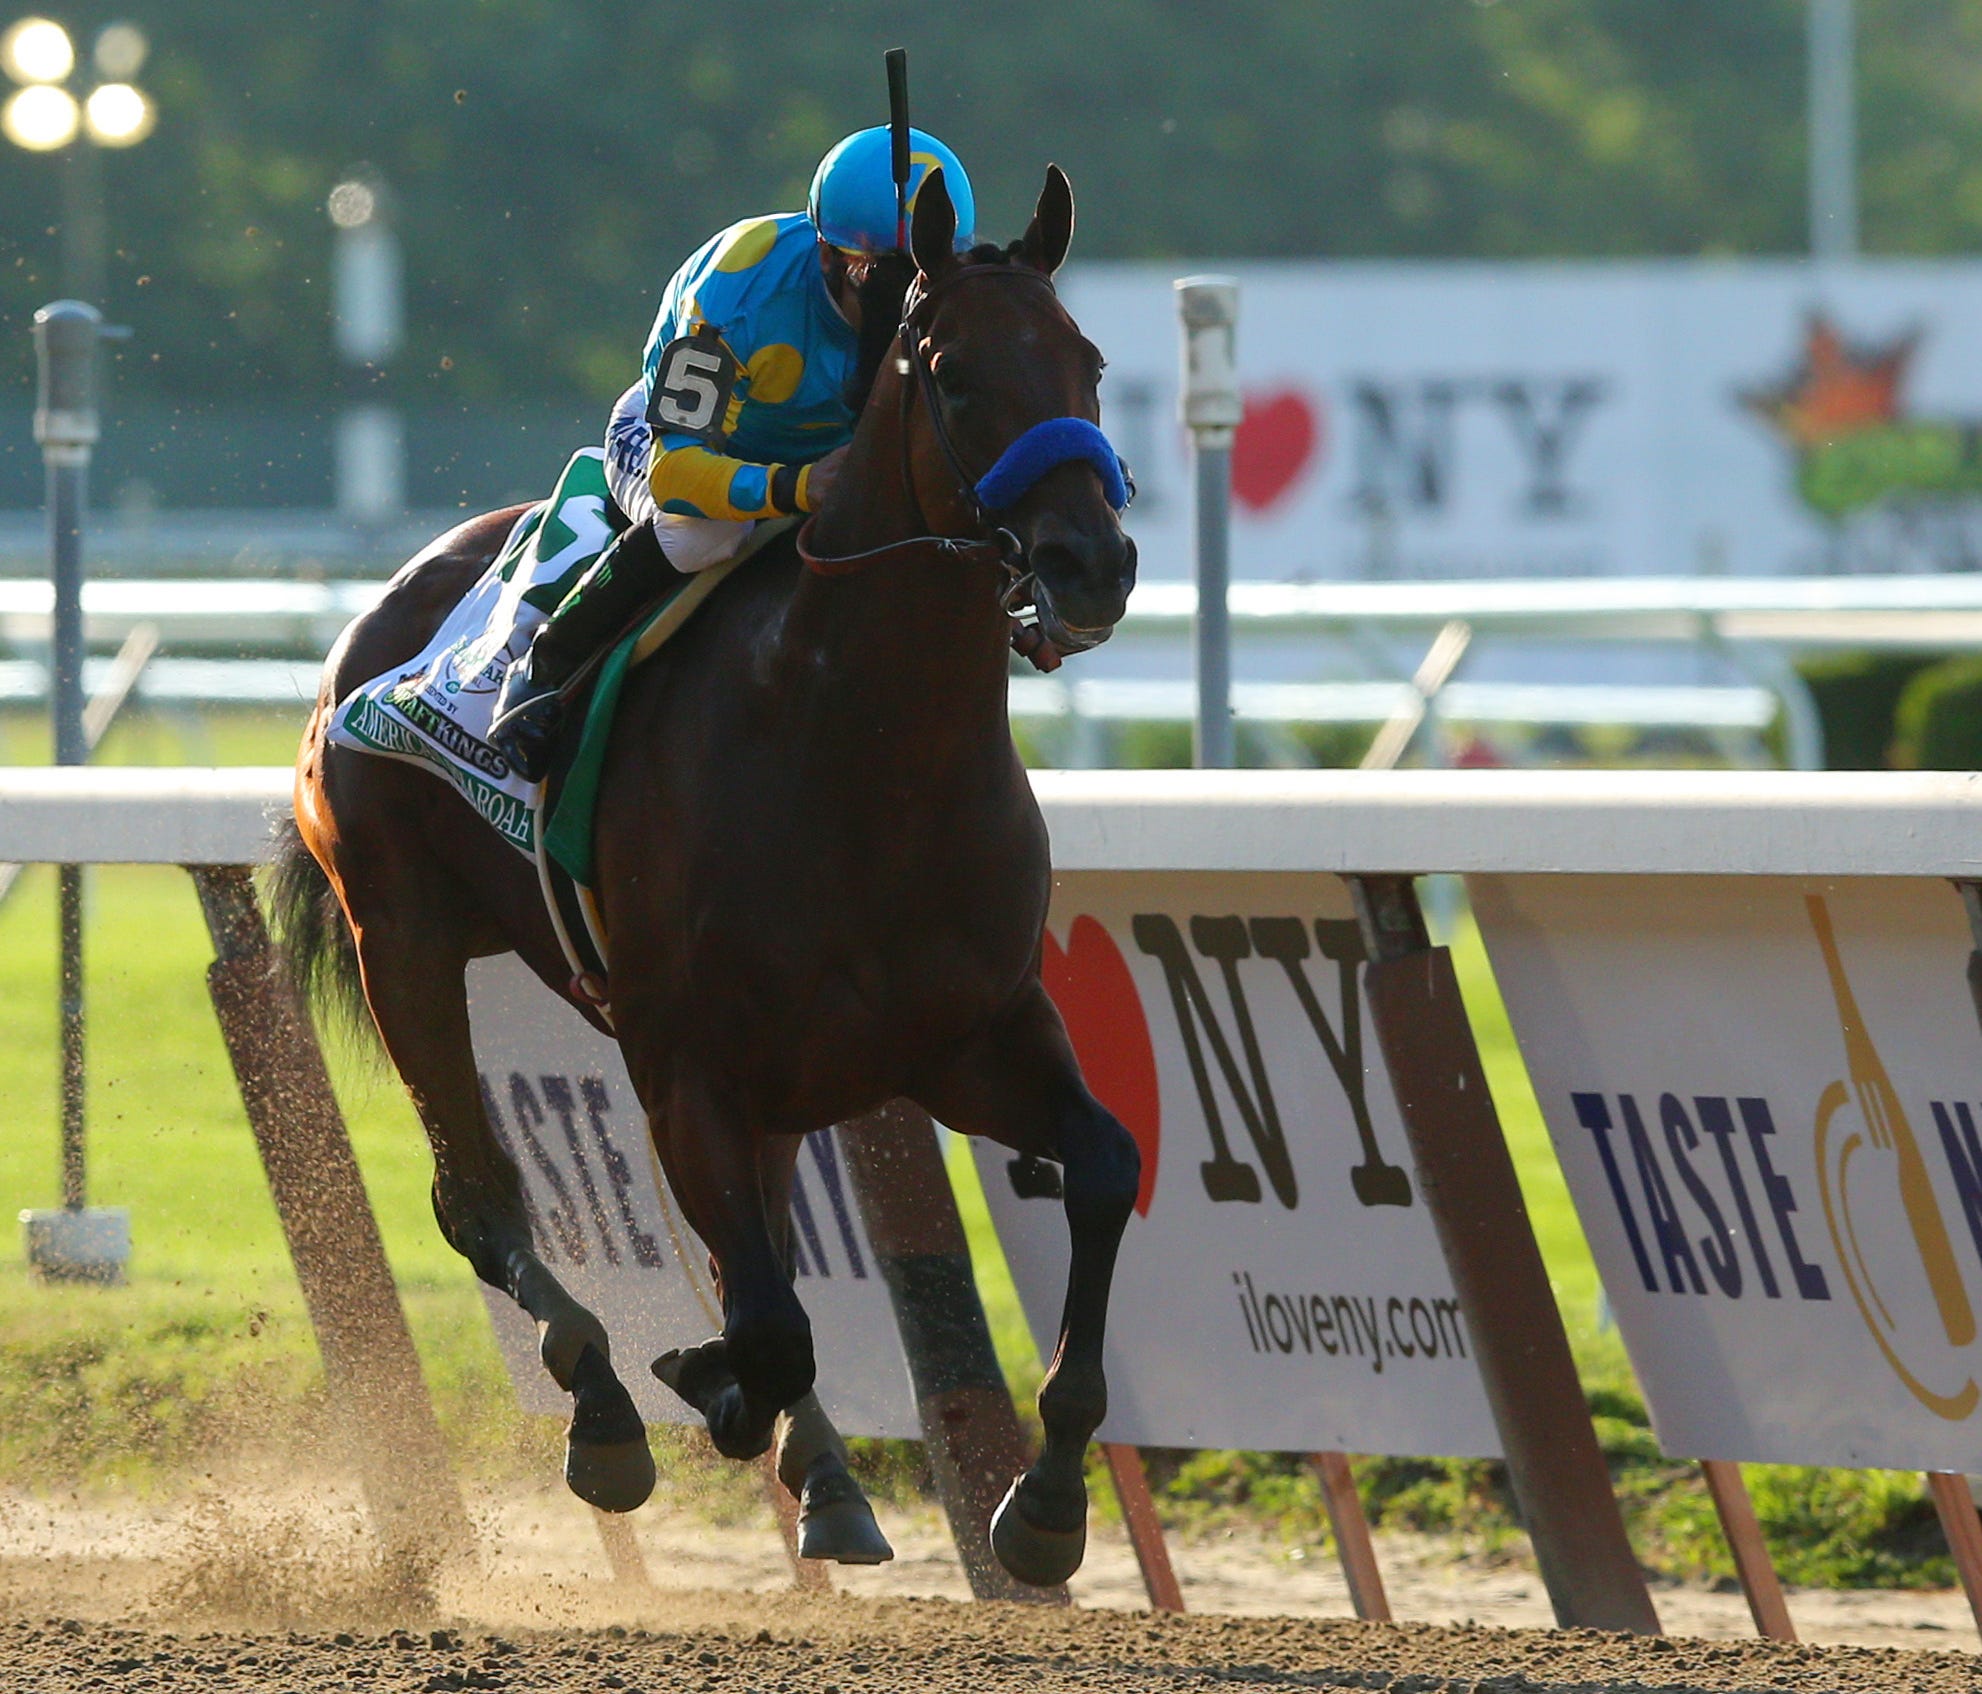 American Pharoah with Victor Espinoza wins the 2015 Belmont Stakes at Belmont Park.